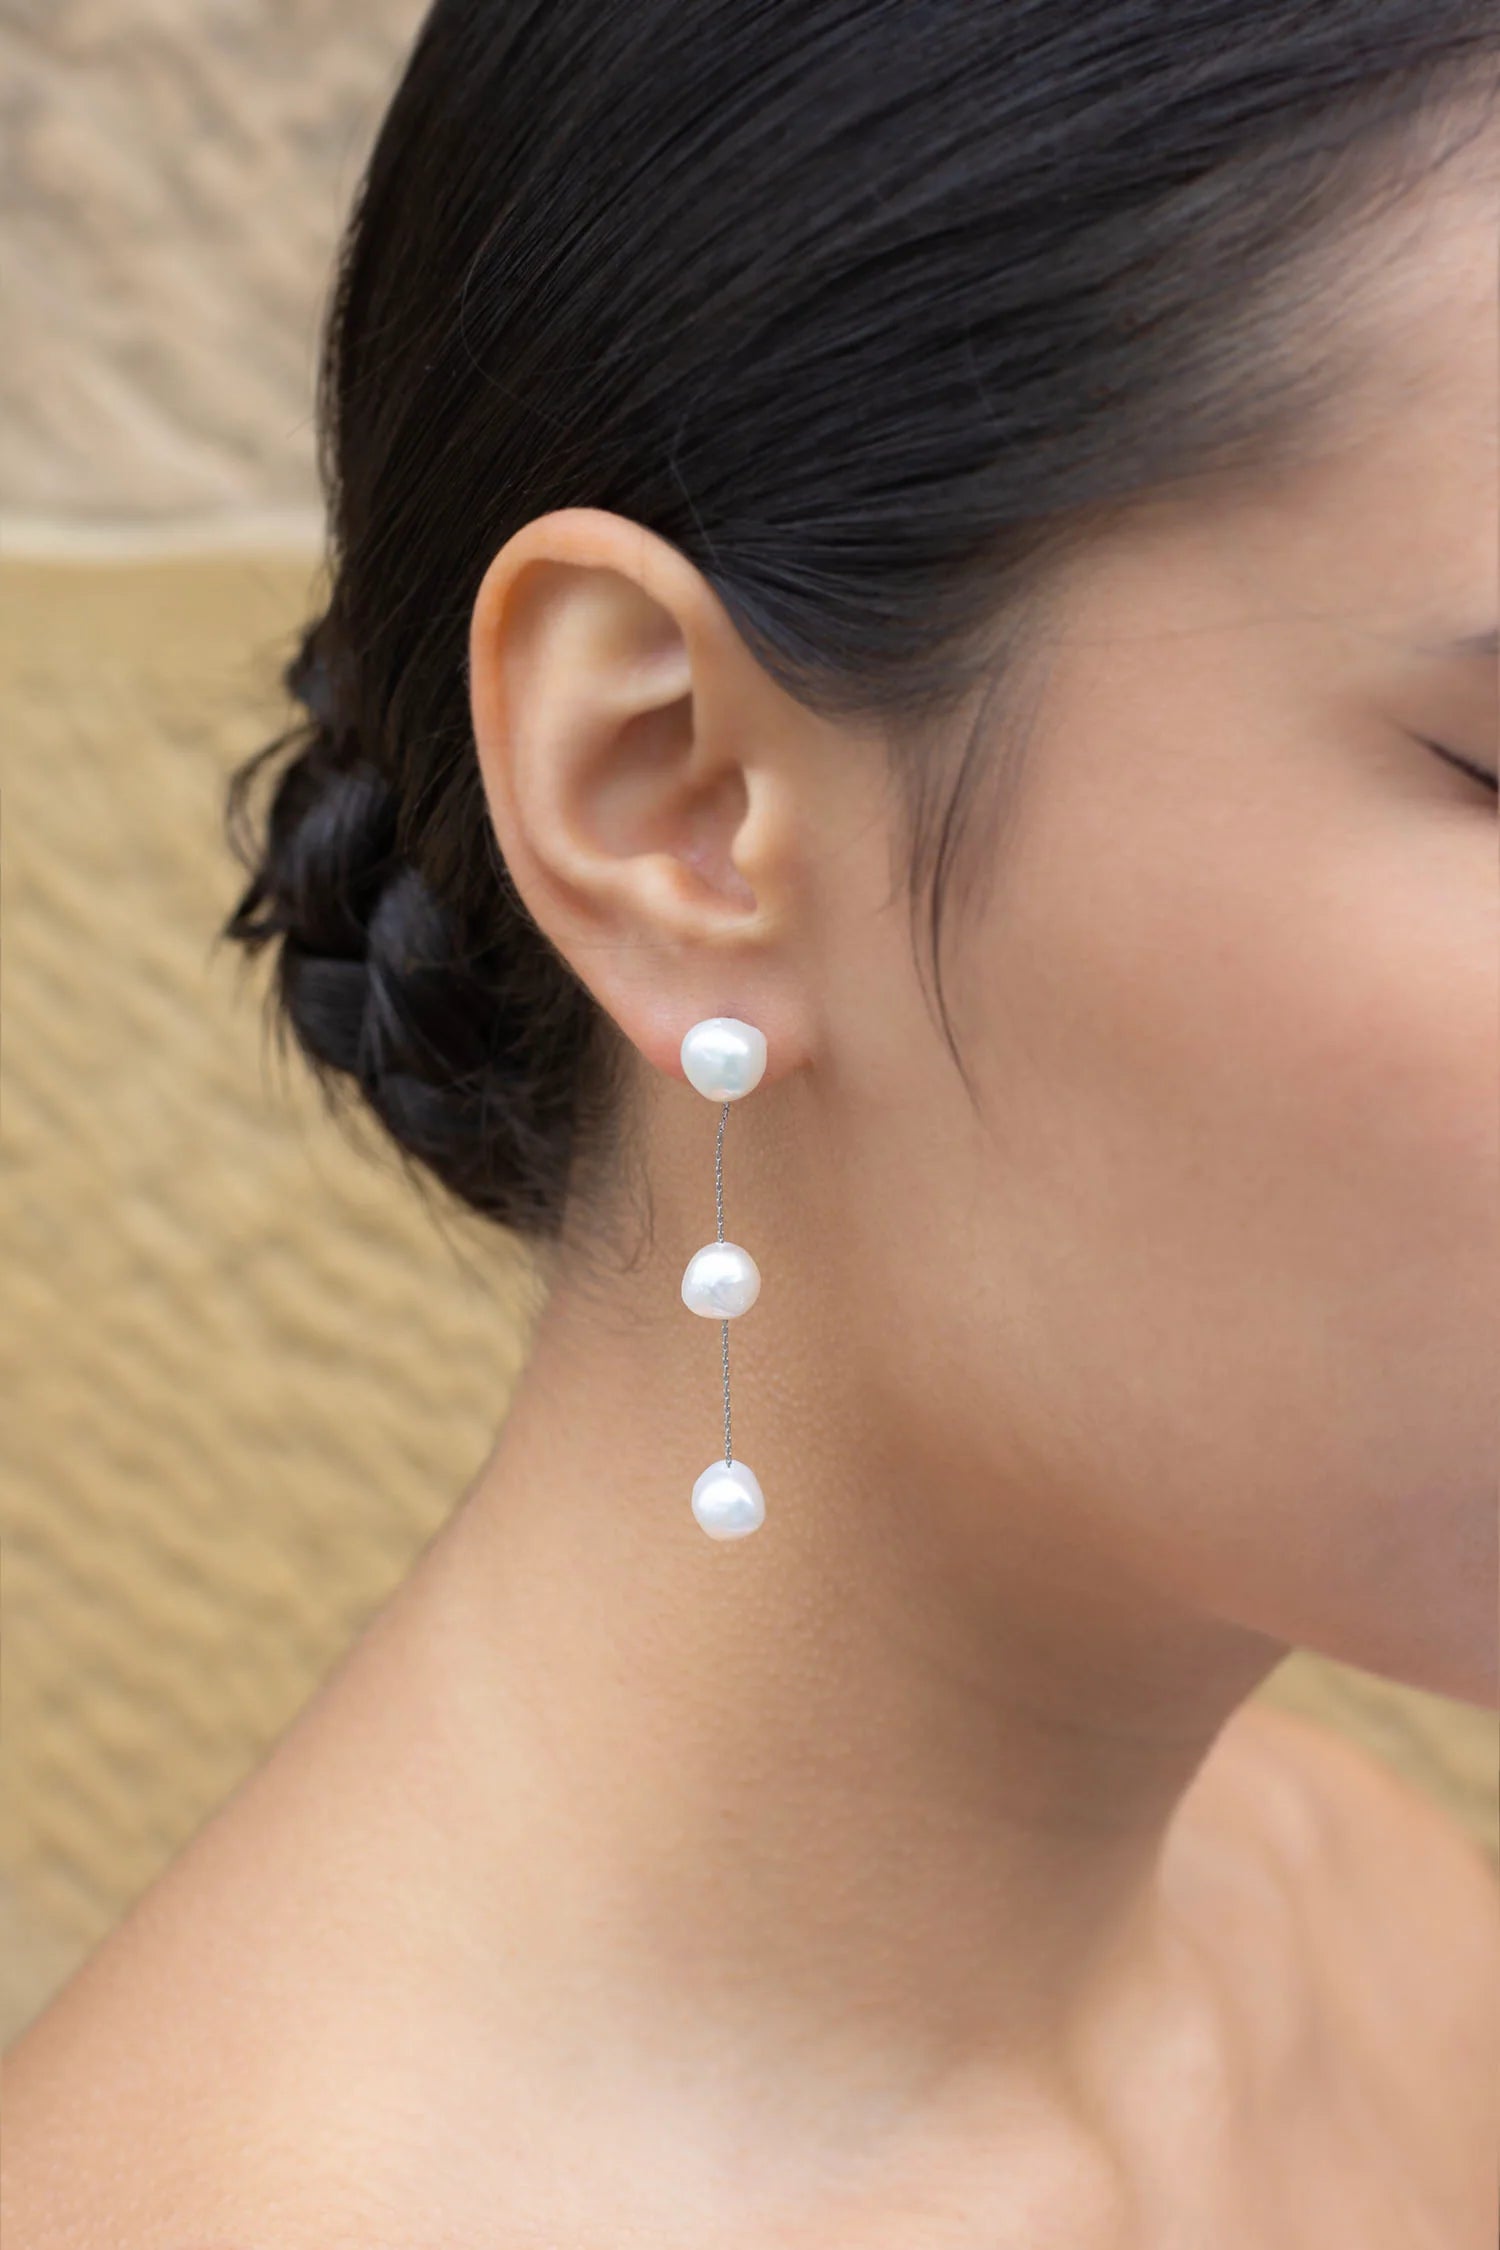 Image of model wearing earring with three freshwater pearls hanging in a row joined by silver chain.